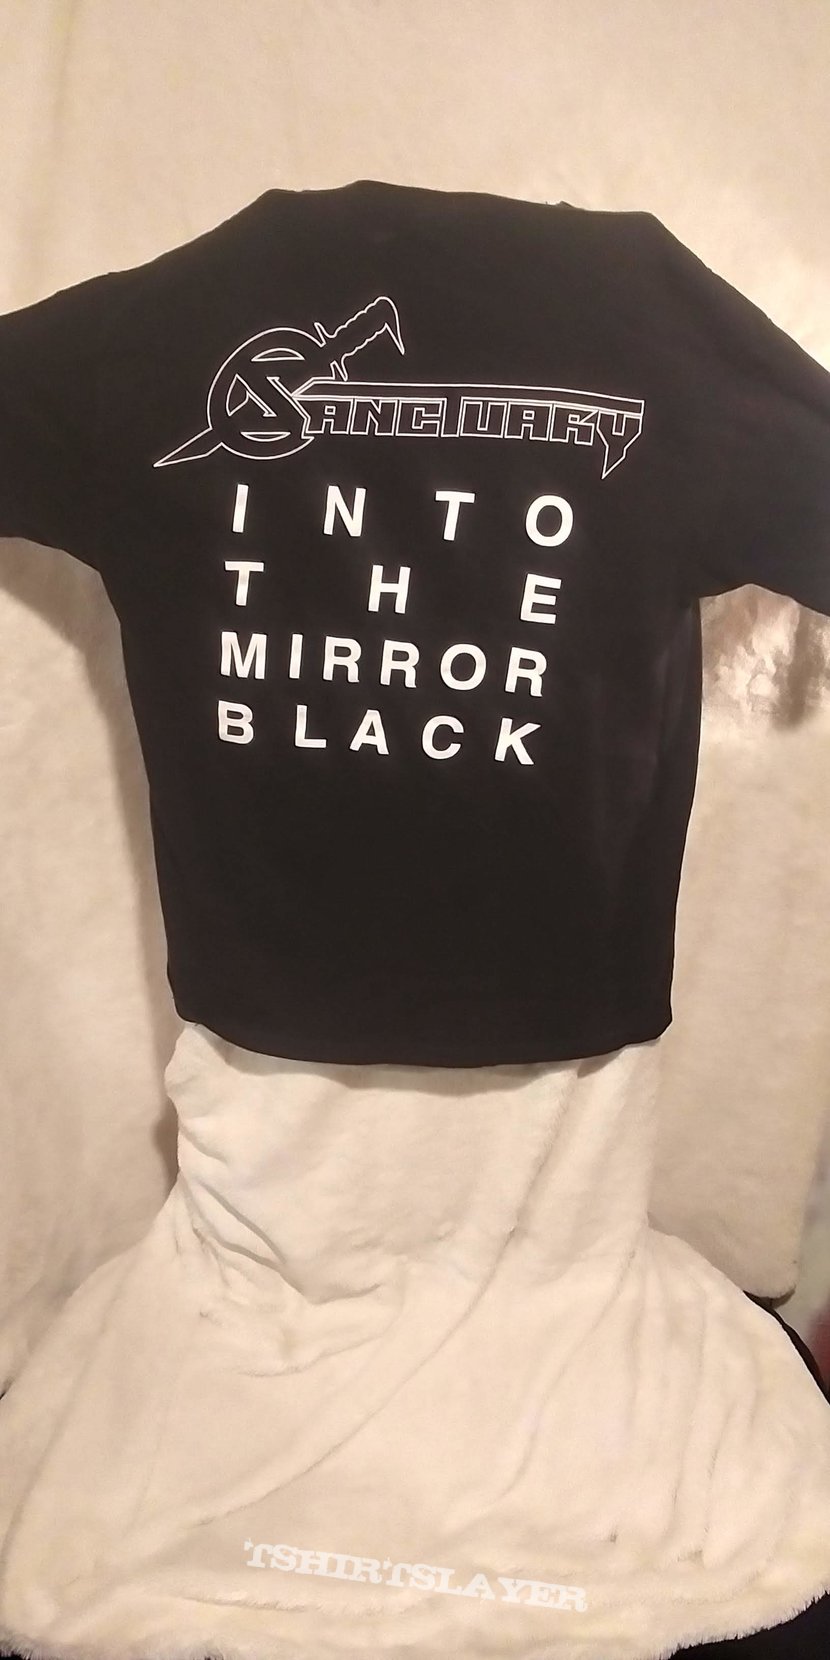 SS Sanctuary Into The Mirror BlackT shirt